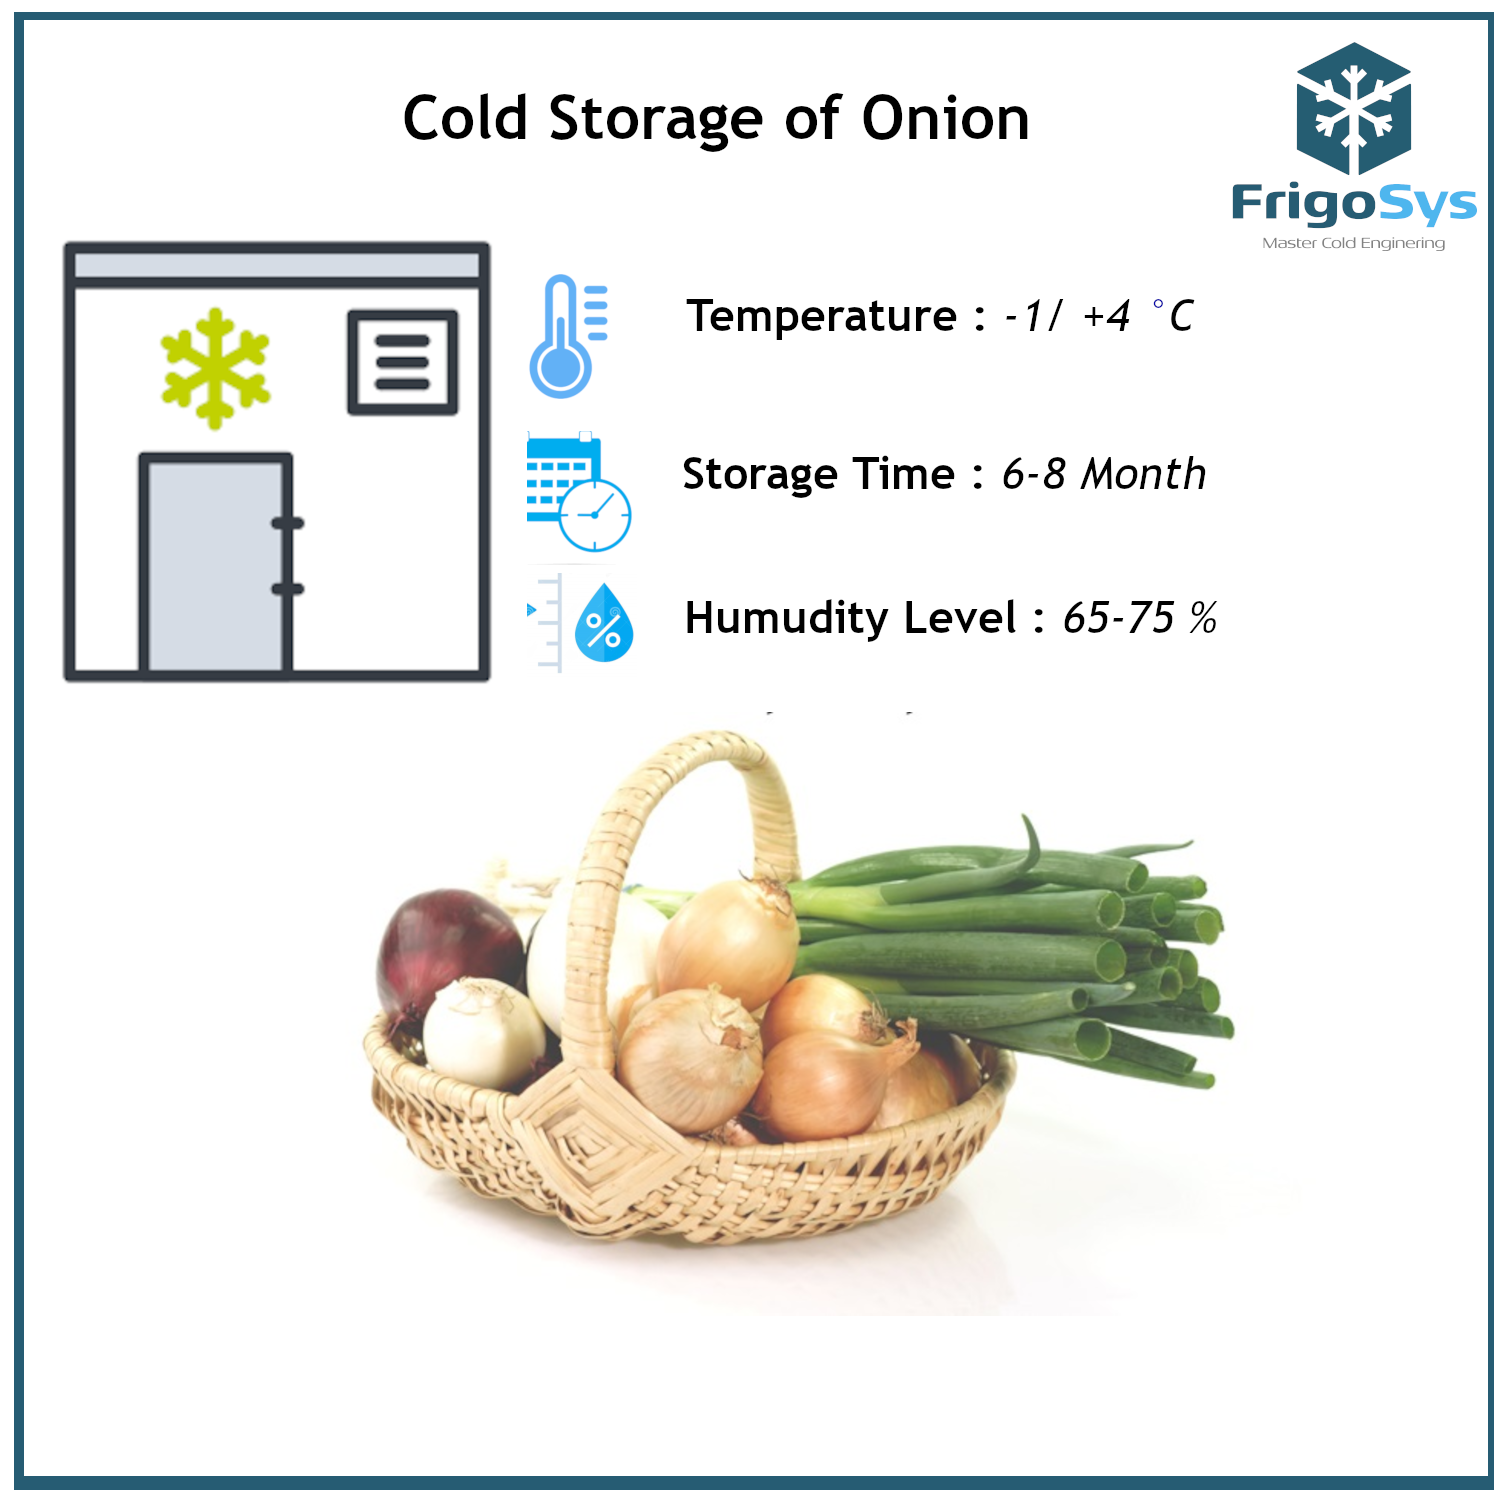 Cold Storage of Onion  Industrial Cold Room & Equipments